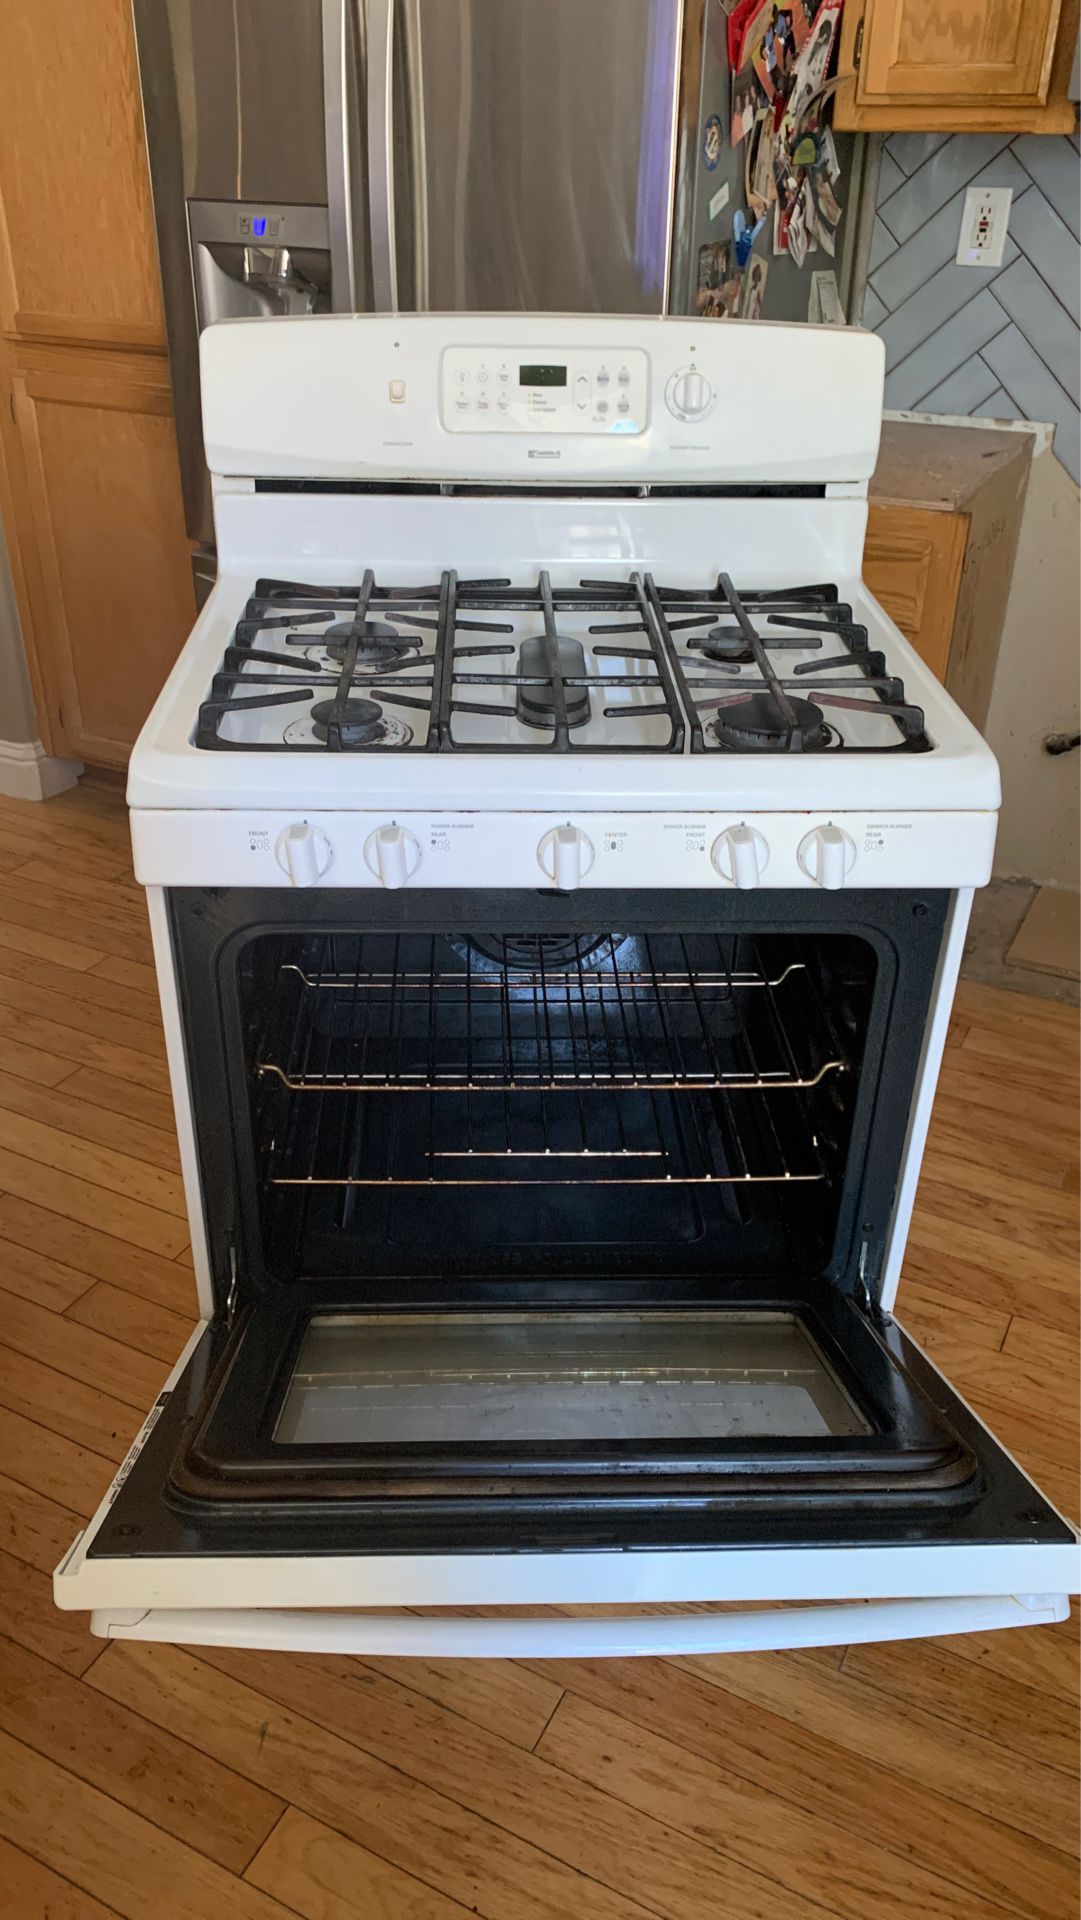 Kenmore Gas Range Stove/Oven with Convection, Model 7290 - White for sale